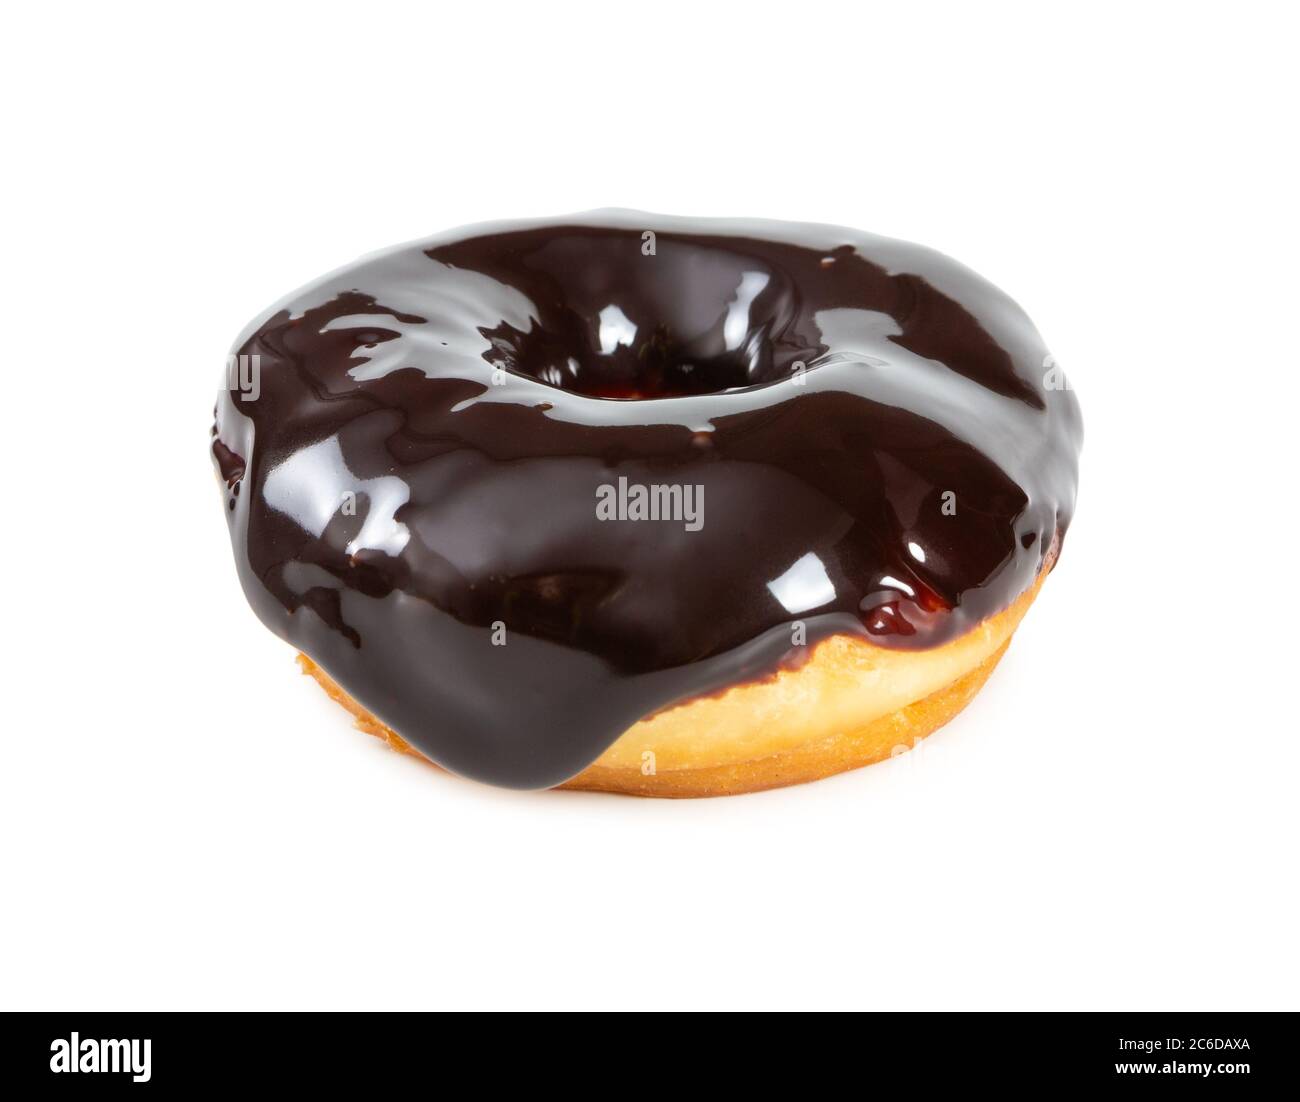 Donut with mirror chocolate icing isolated on white background. Stock Photo